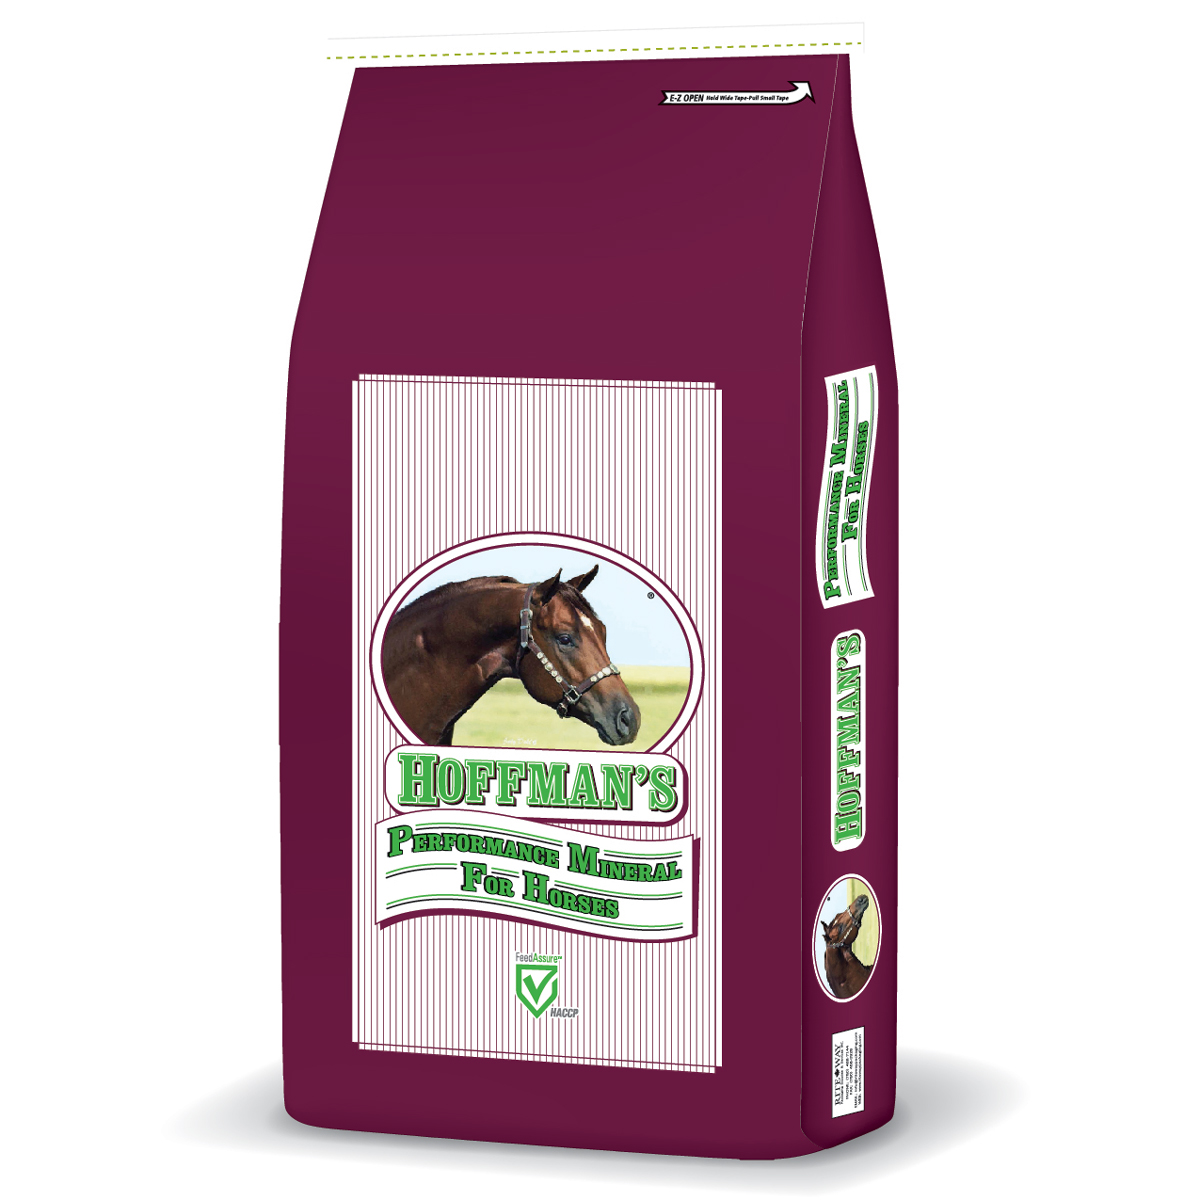 Hoffman's Performance Mineral  - 8 kg